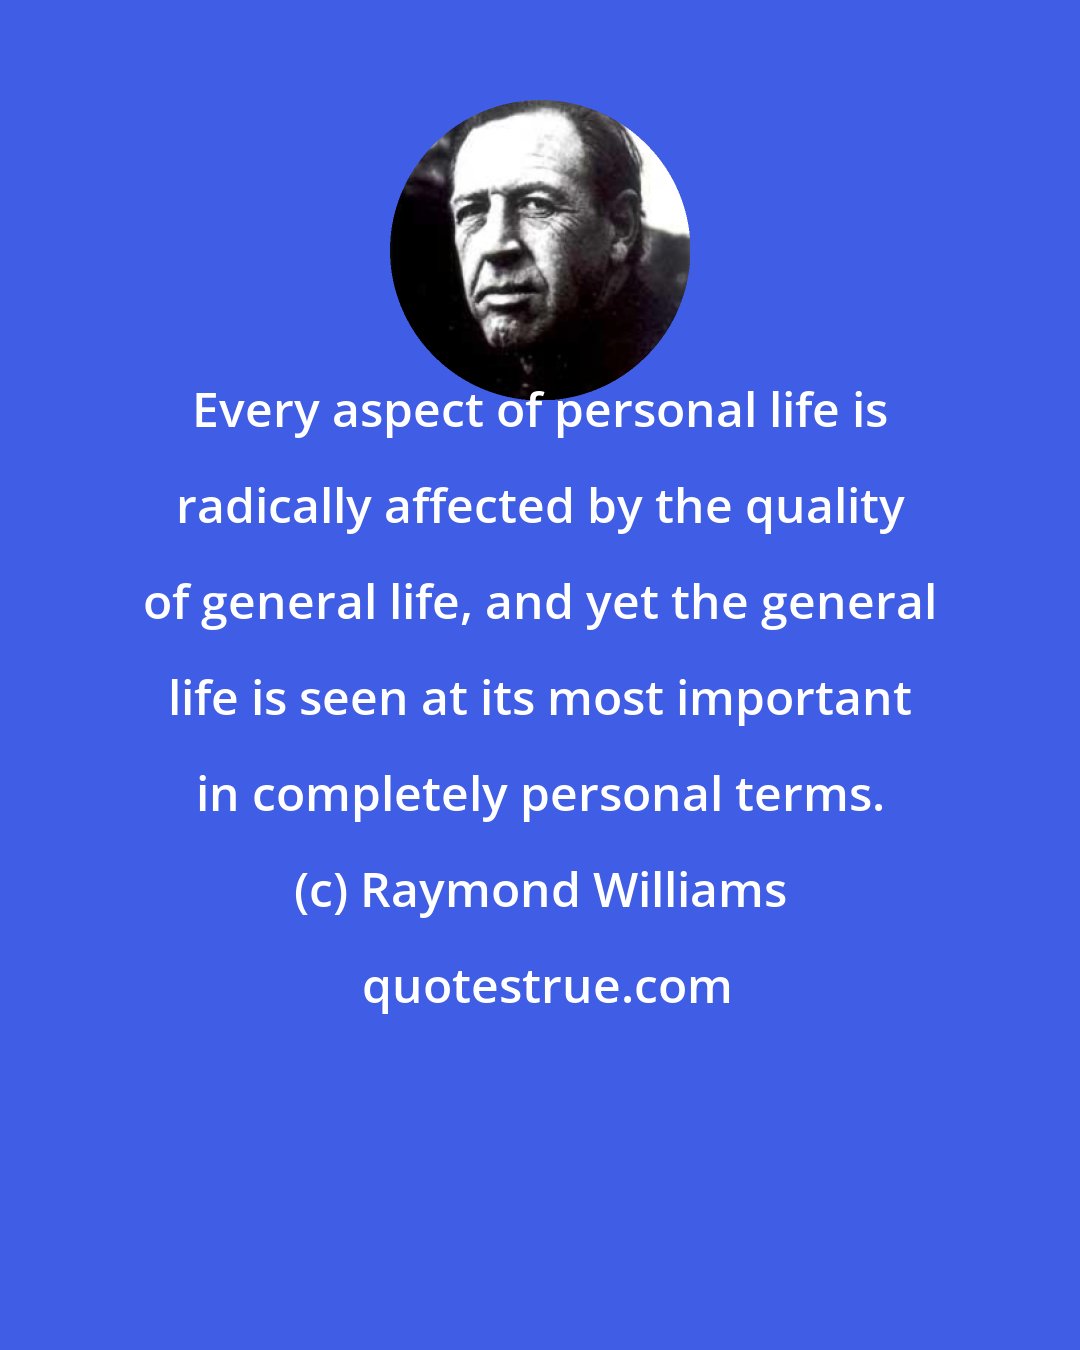 Raymond Williams: Every aspect of personal life is radically affected by the quality of general life, and yet the general life is seen at its most important in completely personal terms.